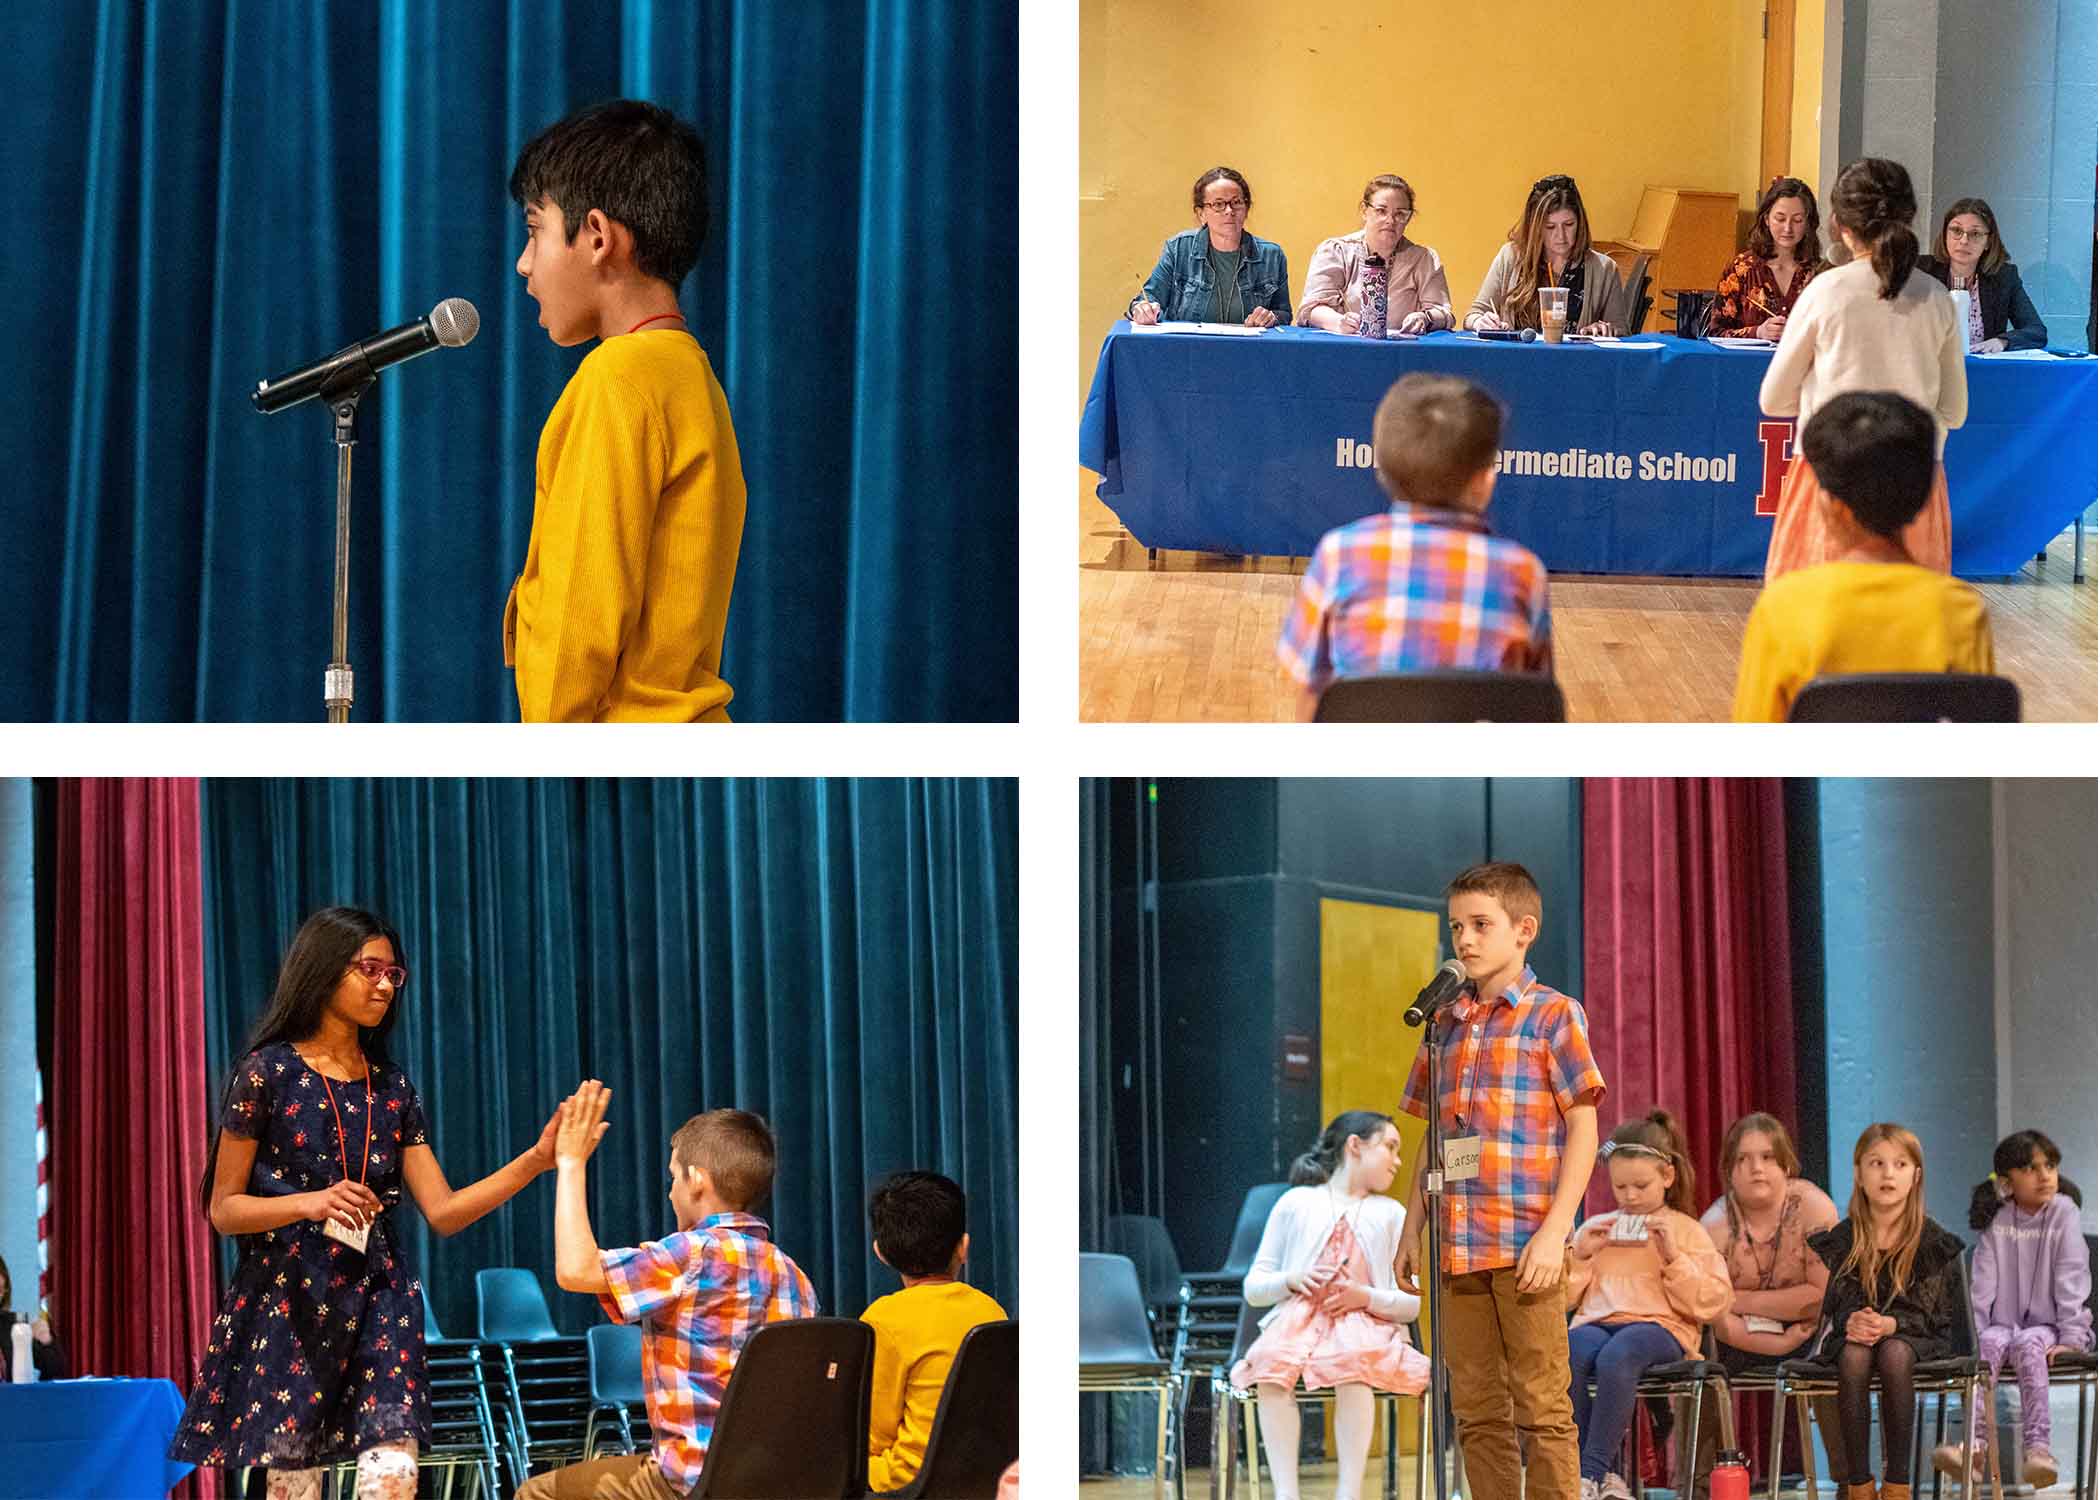 Spelling Bee competition